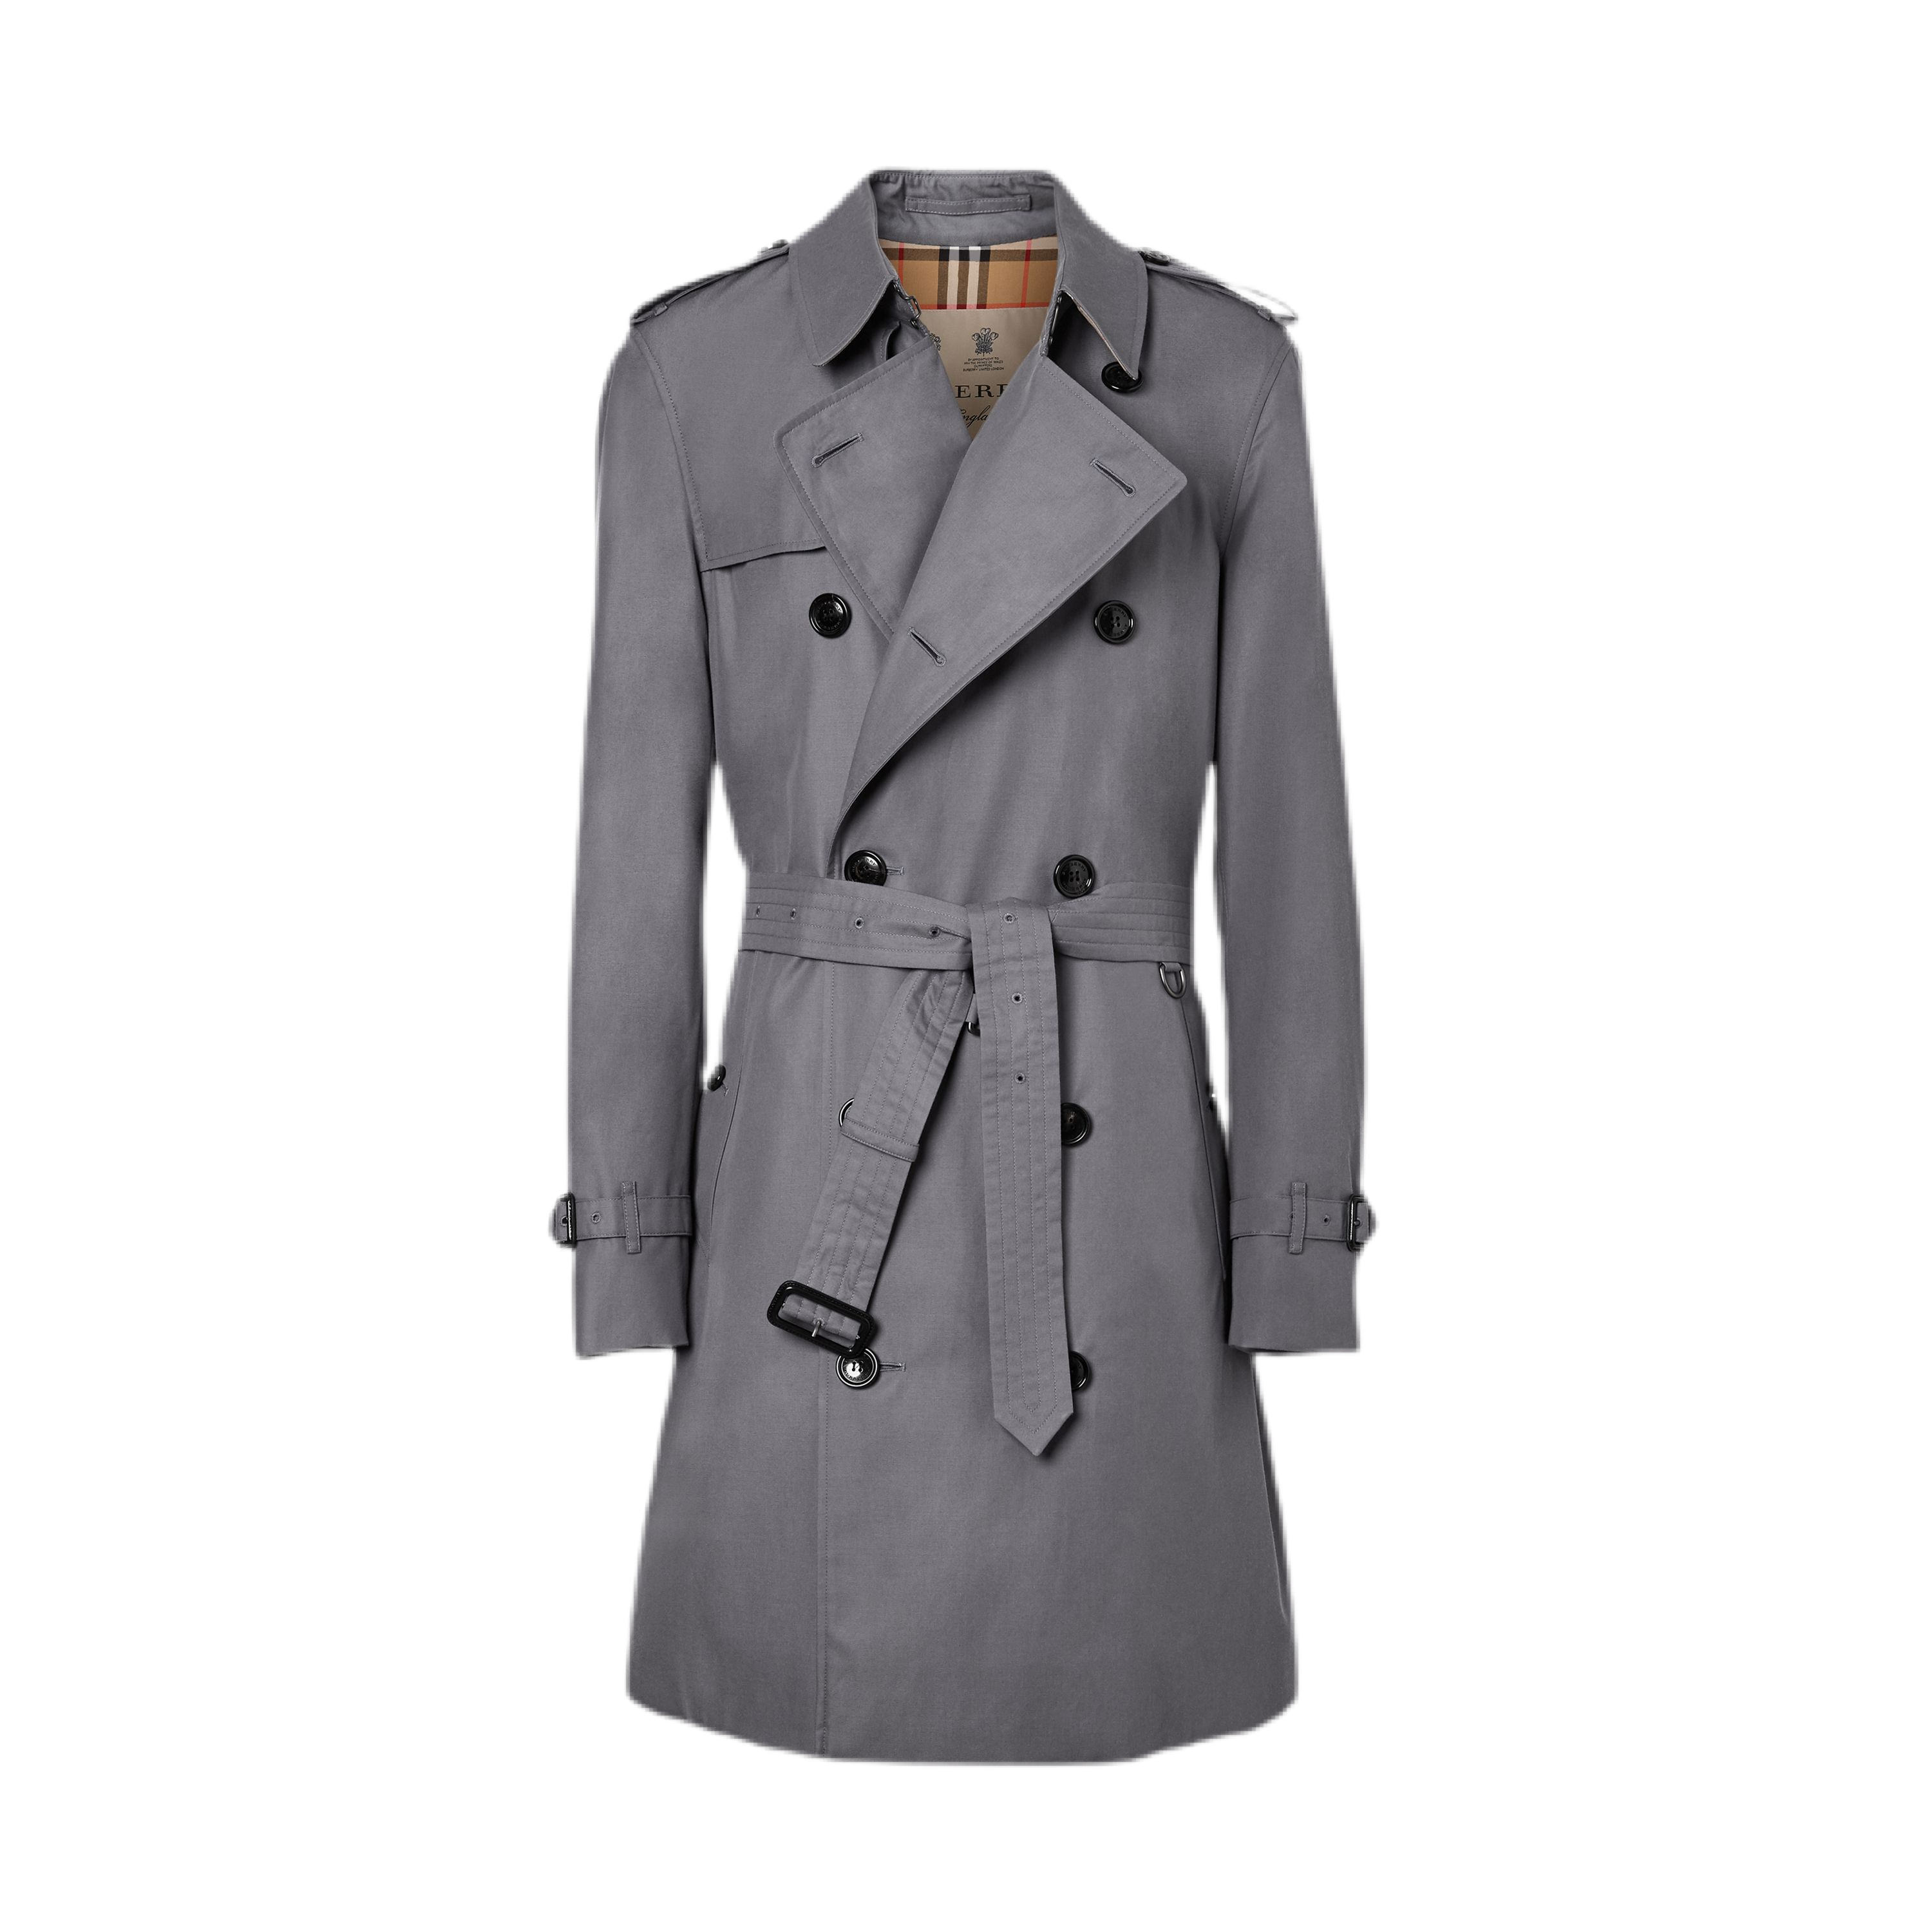 Burberry Trenchcoat Guide: Burberry Trenchcoats-Modelle im Überblick